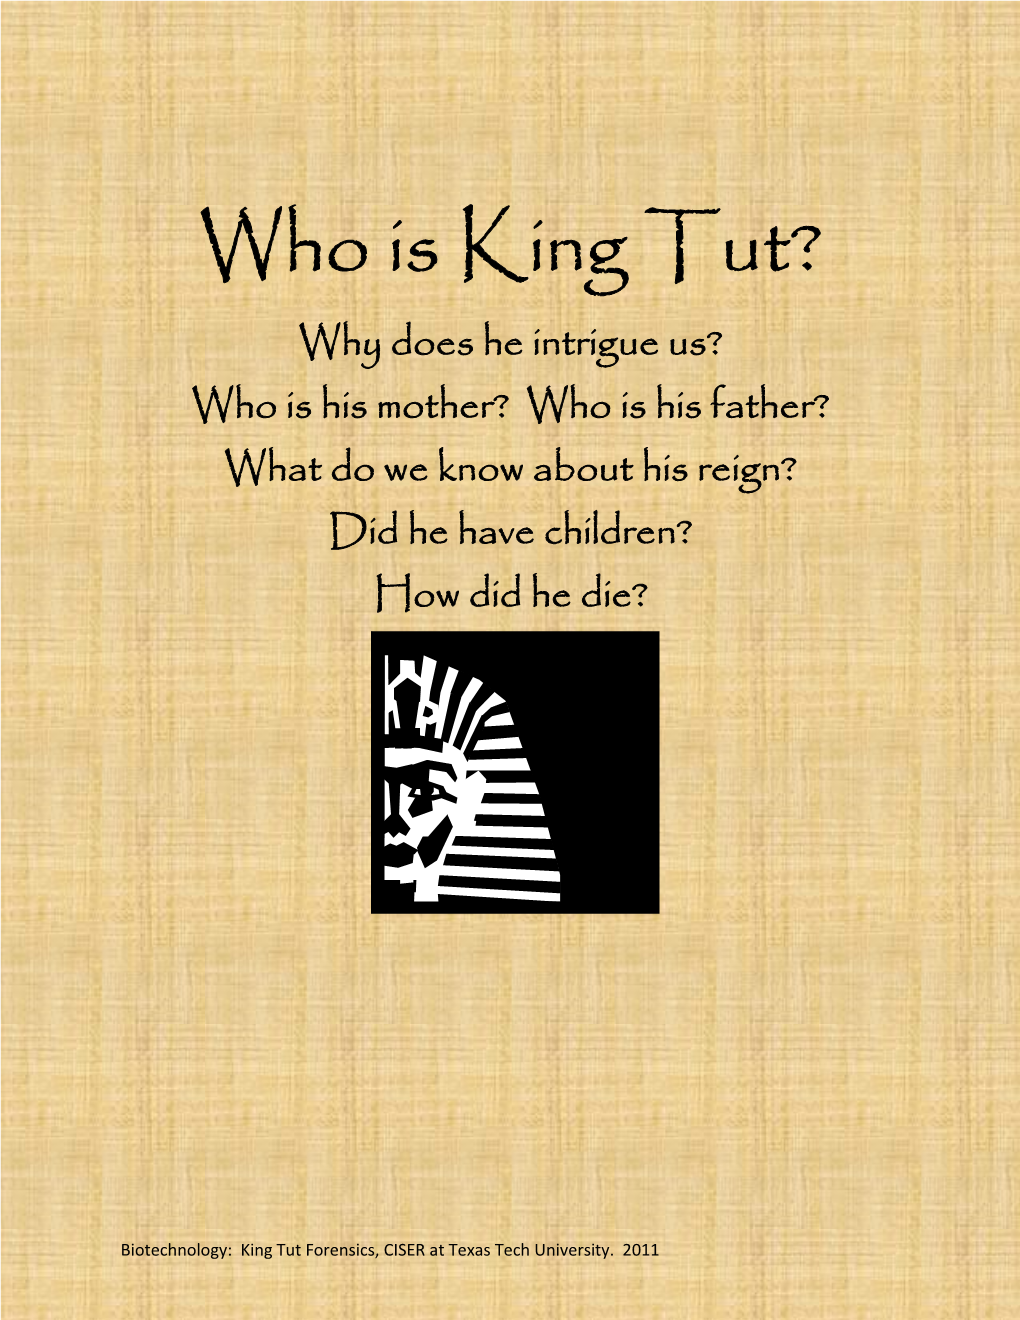 Who Is King Tut? Why Does He Intrigue Us? Who Is His Mother? Who Is His Father? What Do We Know About His Reign? Did He Have Children? How Did He Die?